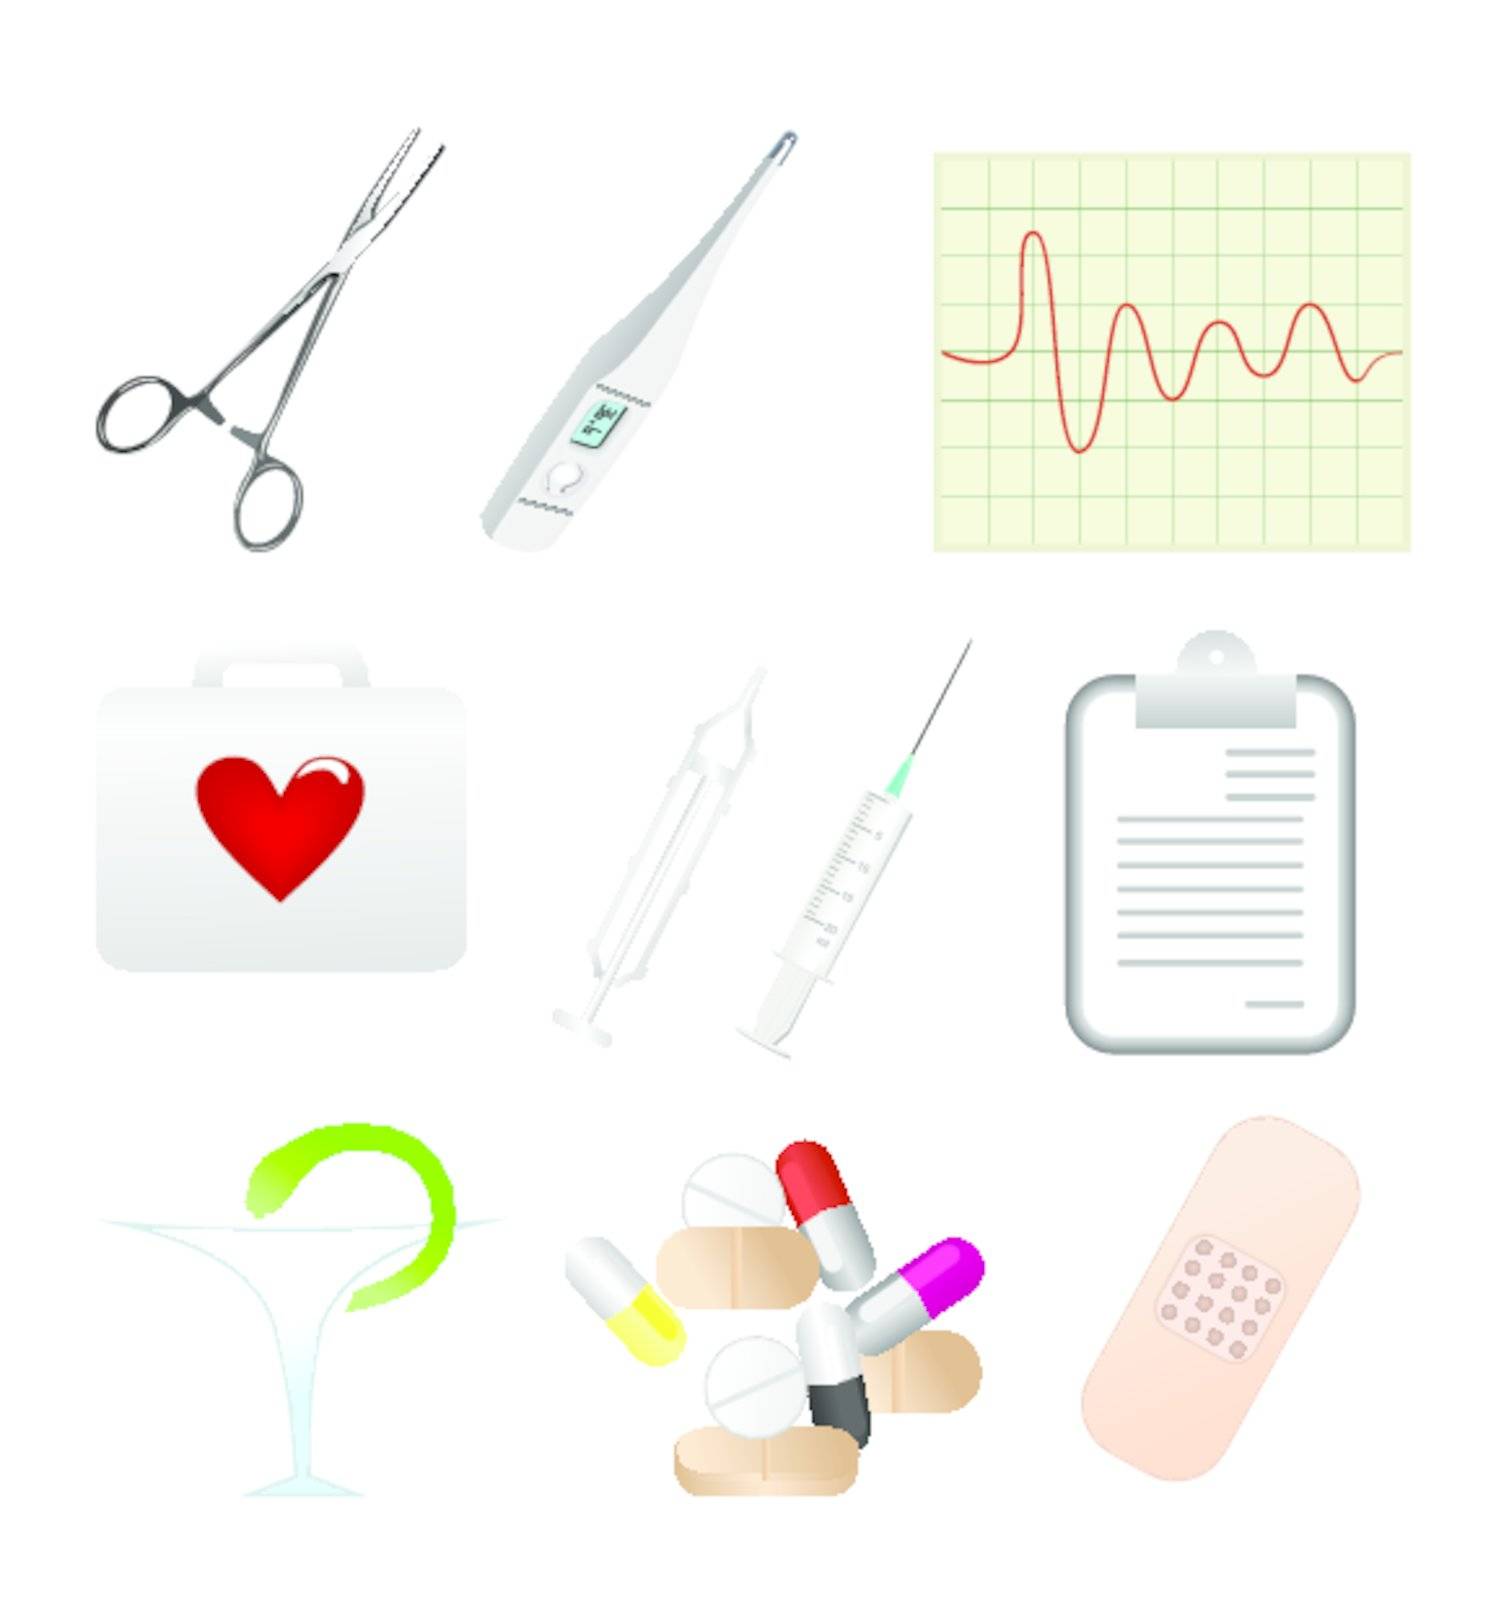 Collection of medical themed icons. Vector